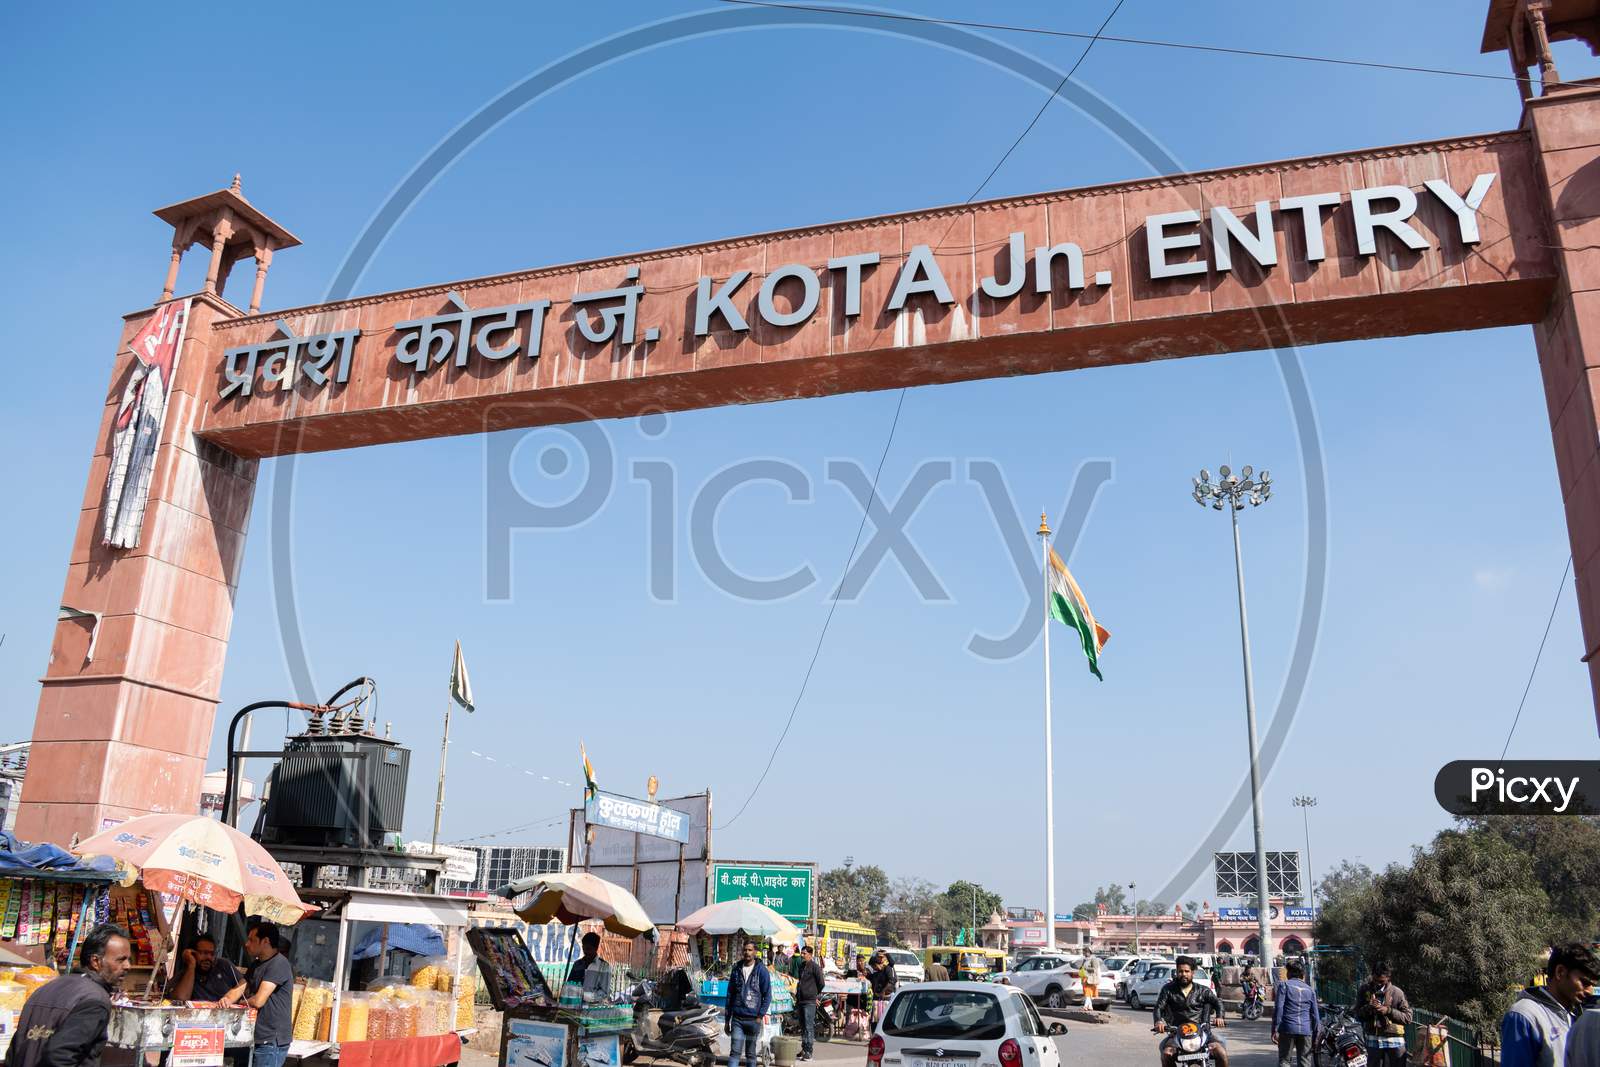 Entry to Kota Junction West Central Railway